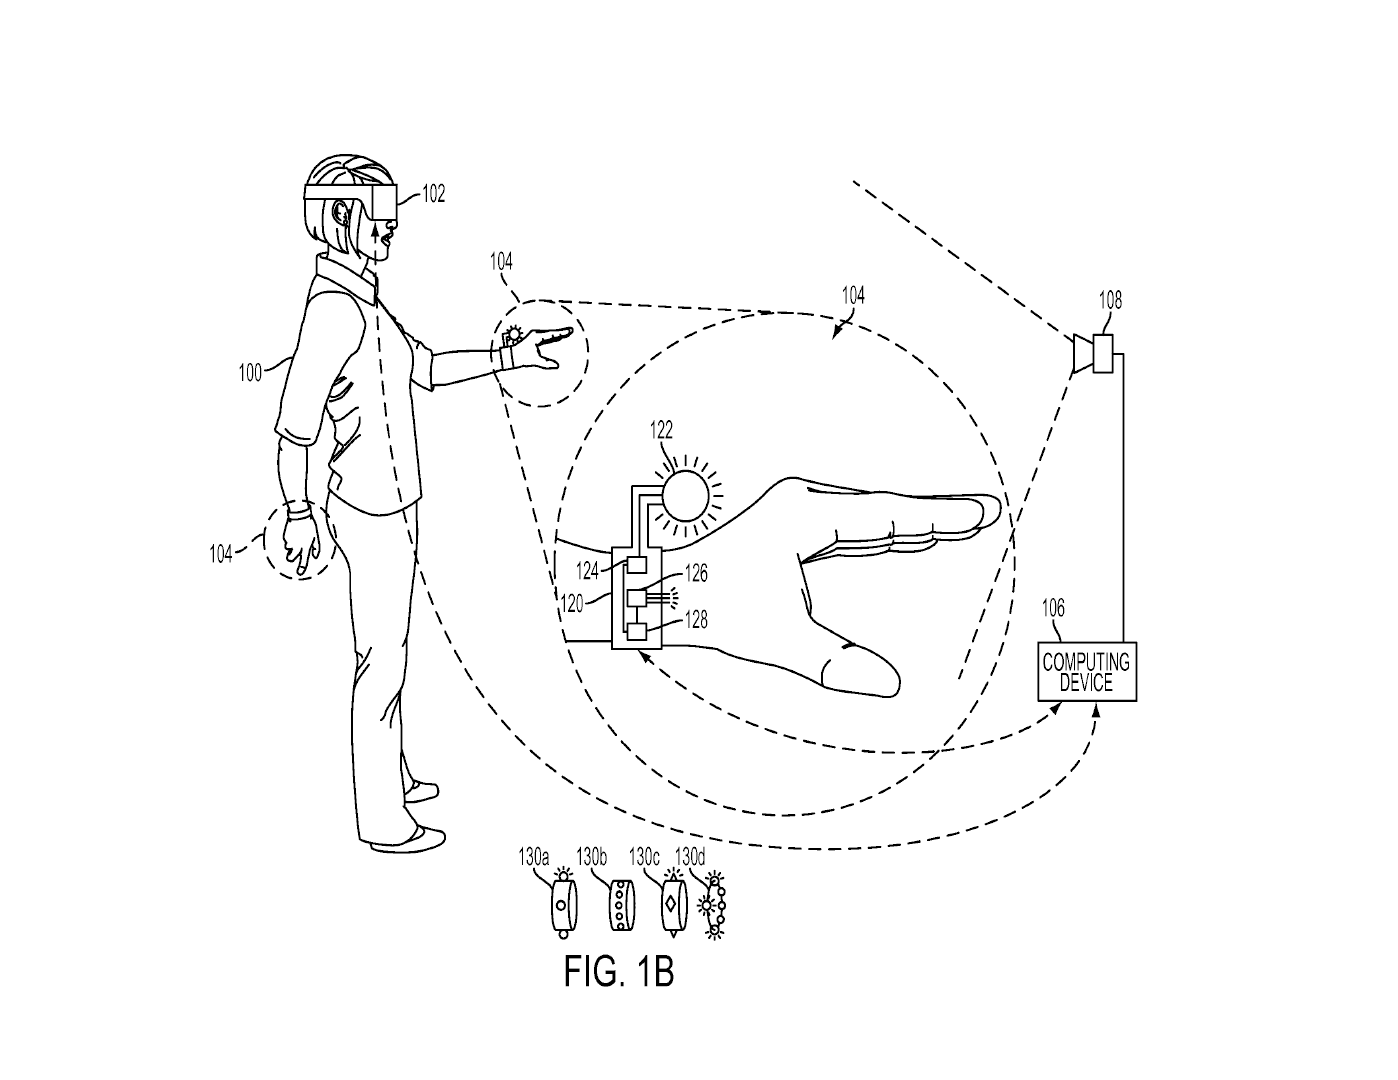 The Sony VR Glove working image shown on patent papers of sony